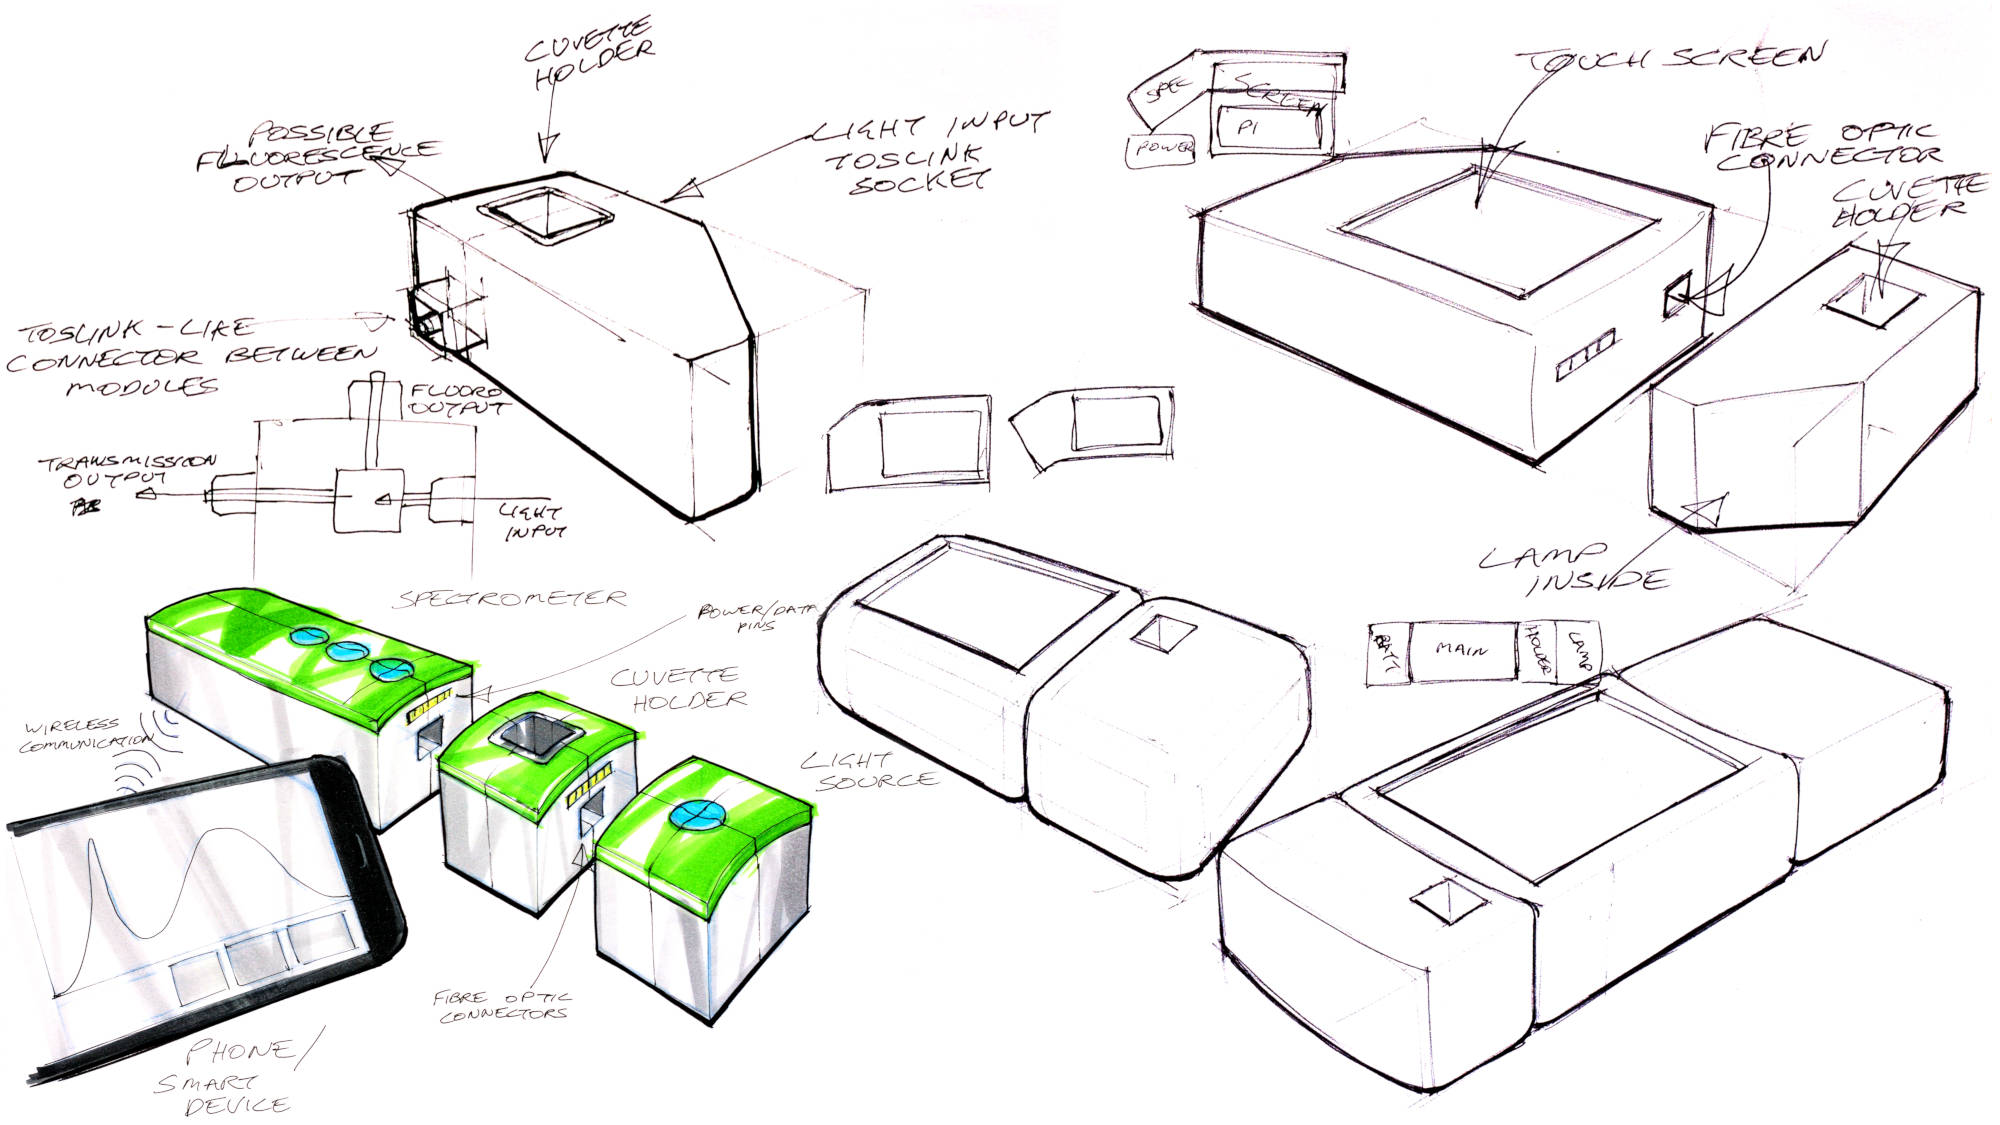 3 pages of sketches combined - mostly about how the different modules of the spectrometer might go together